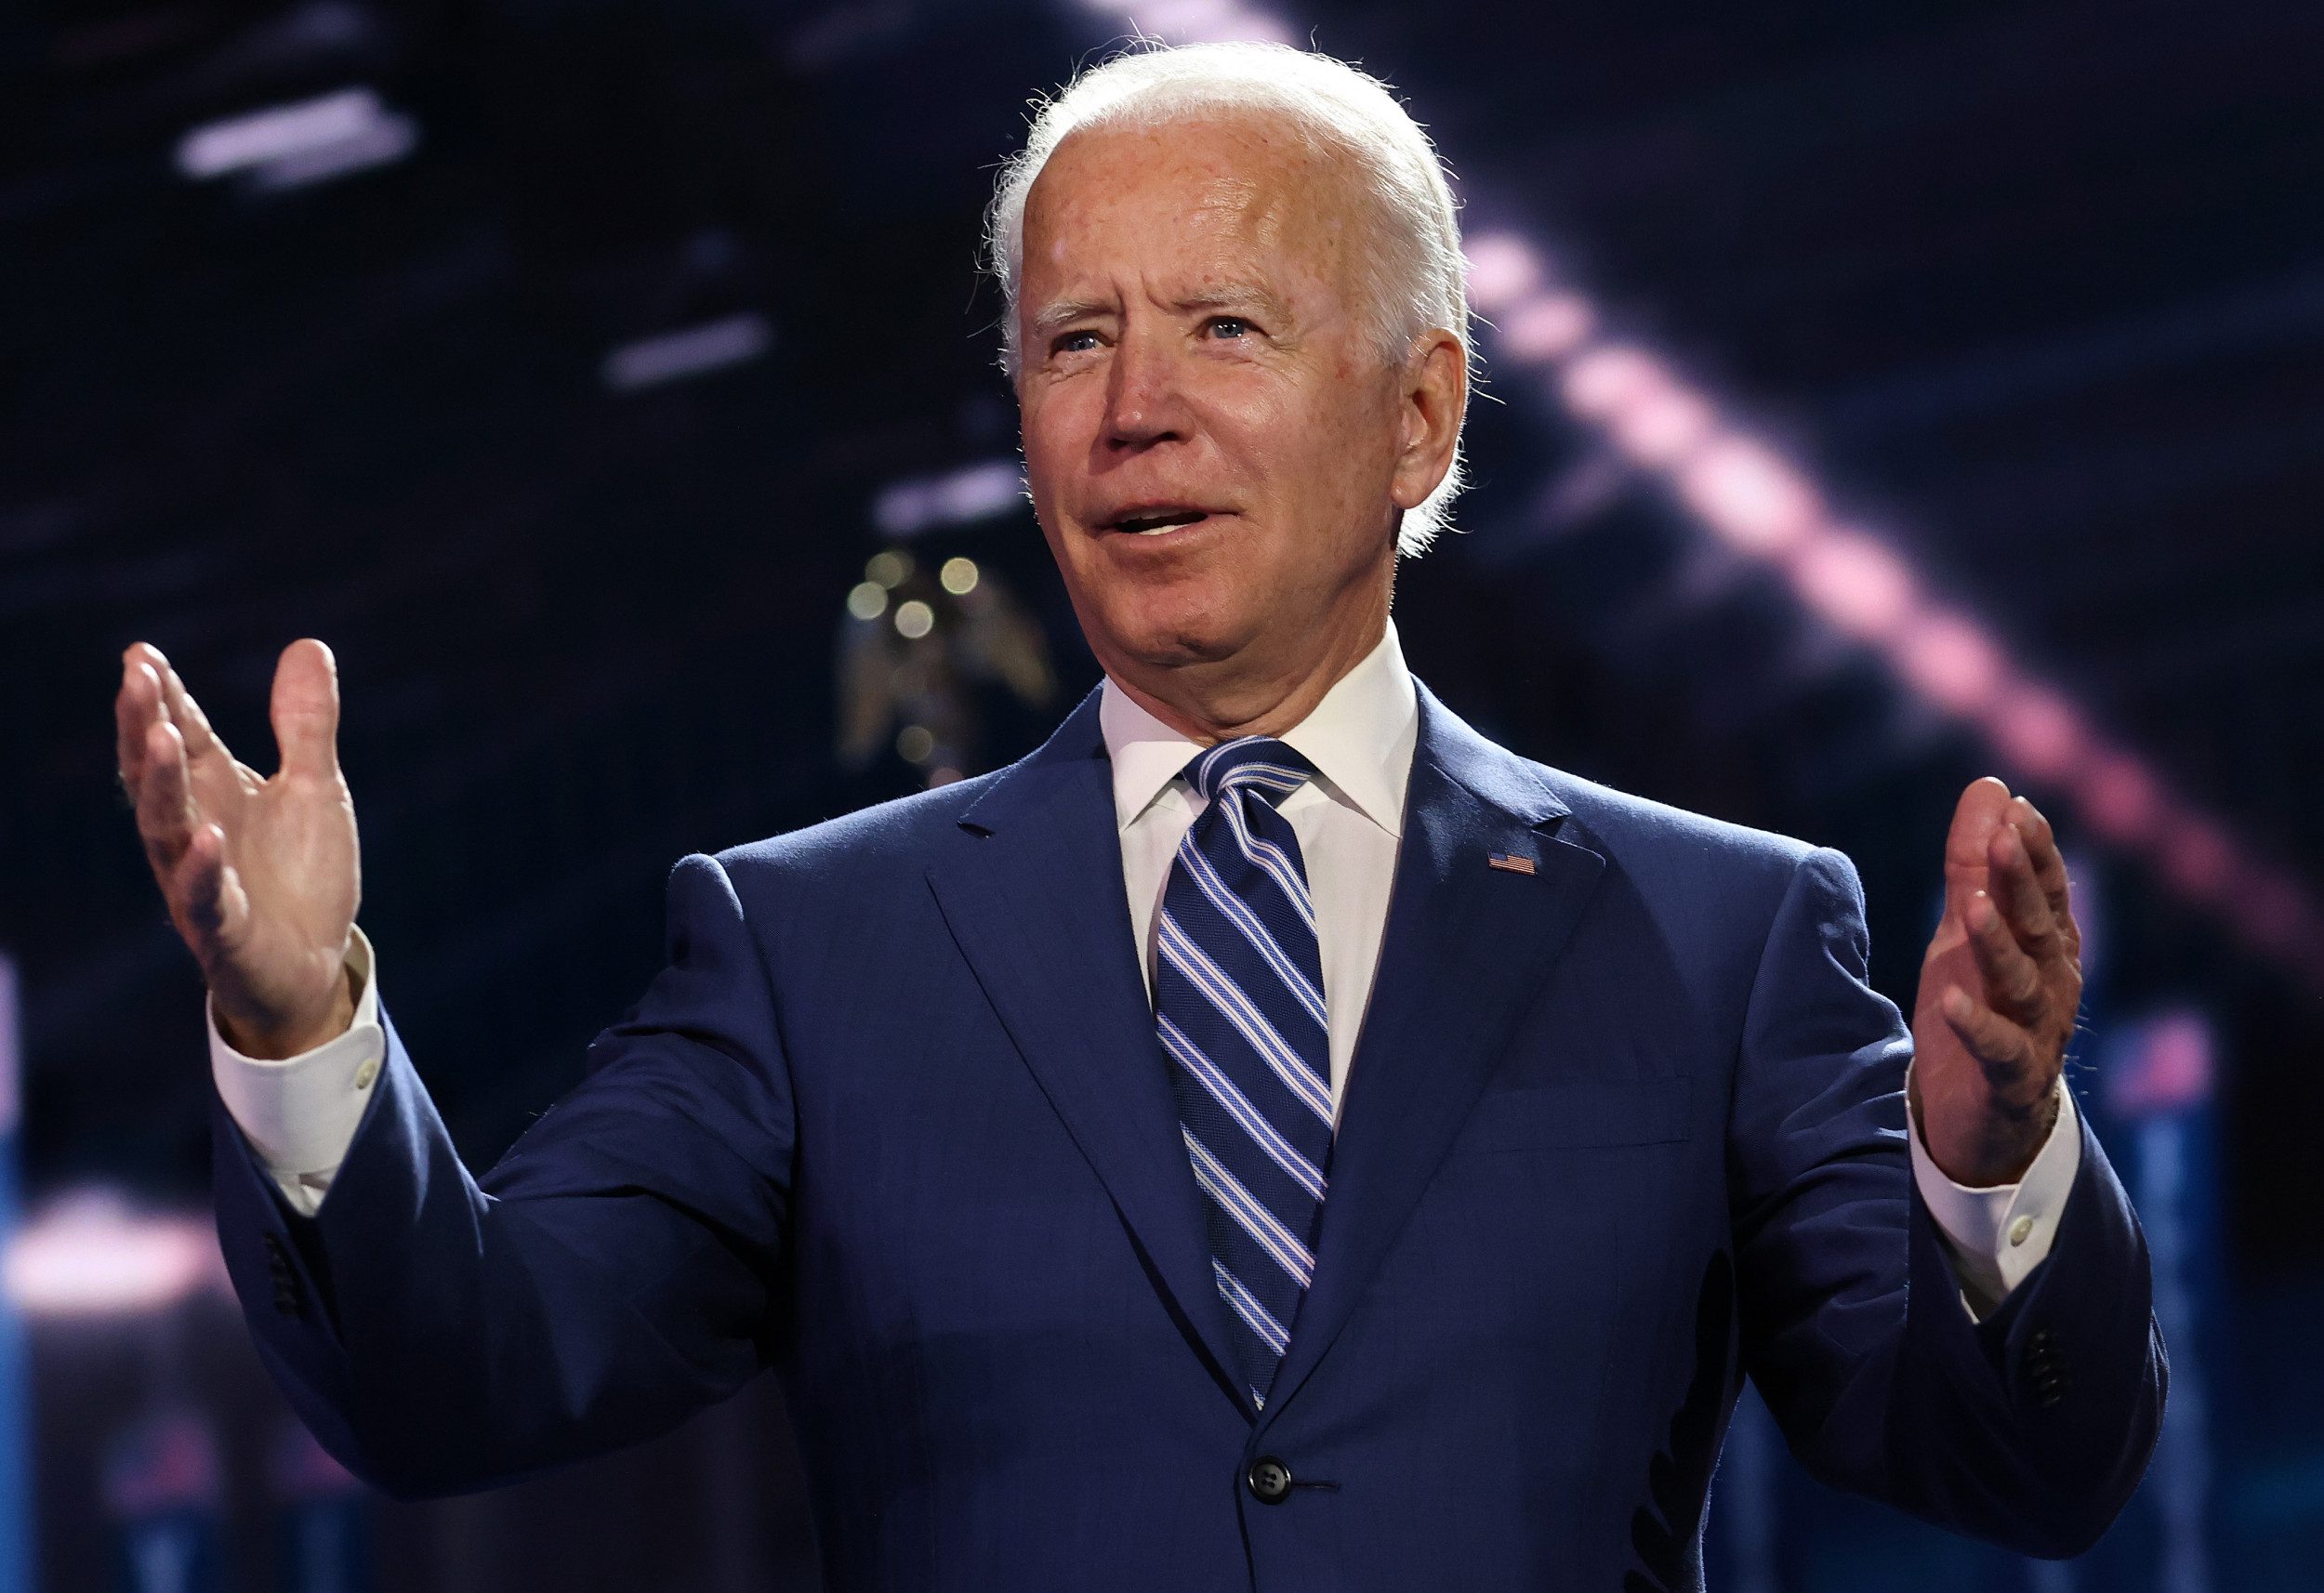 Joe Biden May Adjust Income Threshold for Third Stimulus Check in $1.9 Tn Relief Proposal - Newsweek